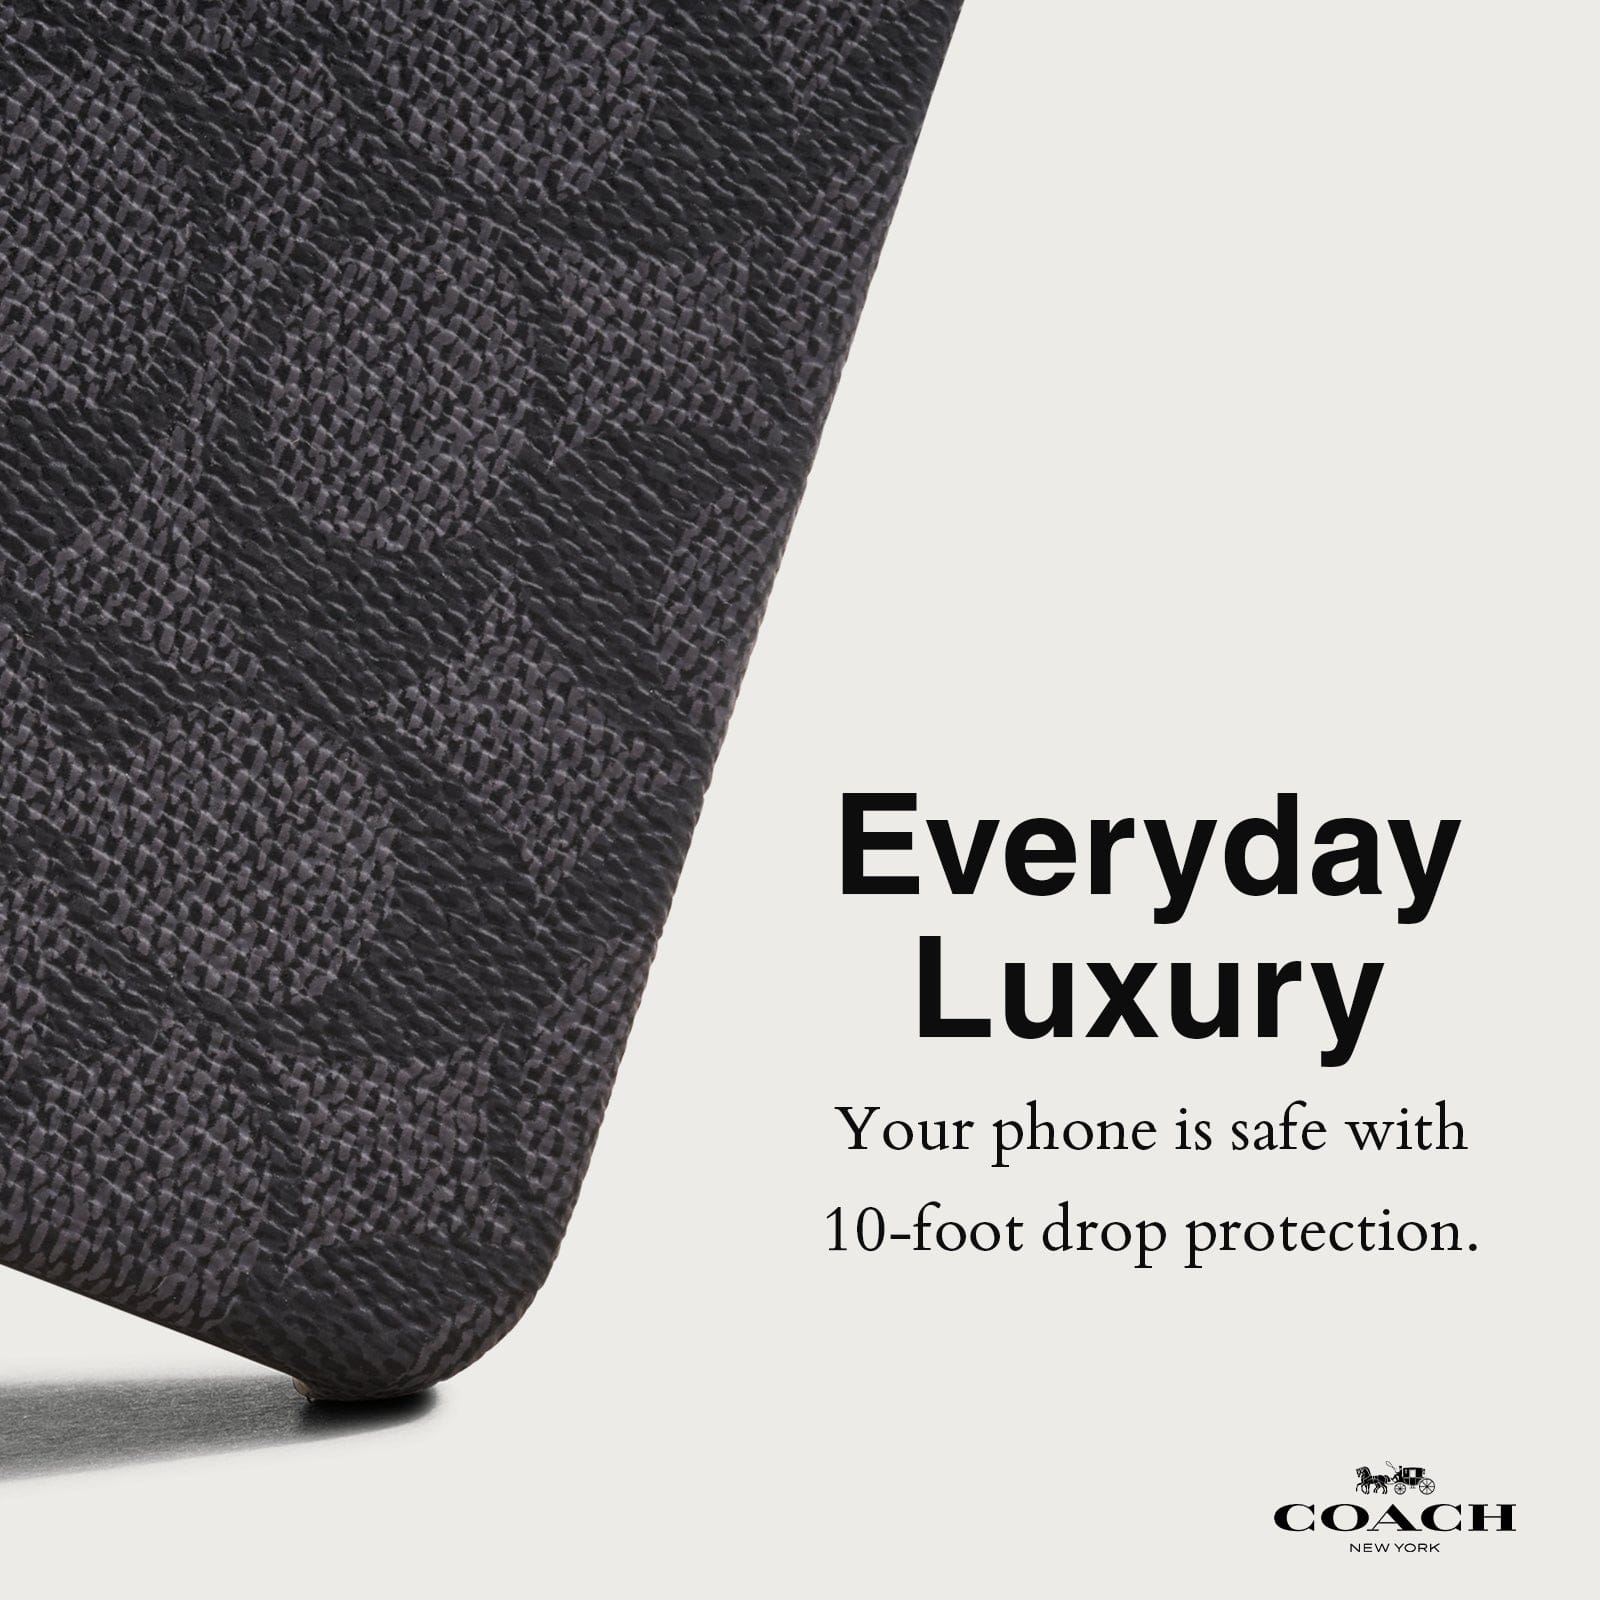 EVERYDAY LUXURY. YOUR PHONE IS SAFE WITH 10-FOOT DROP PROTECITON